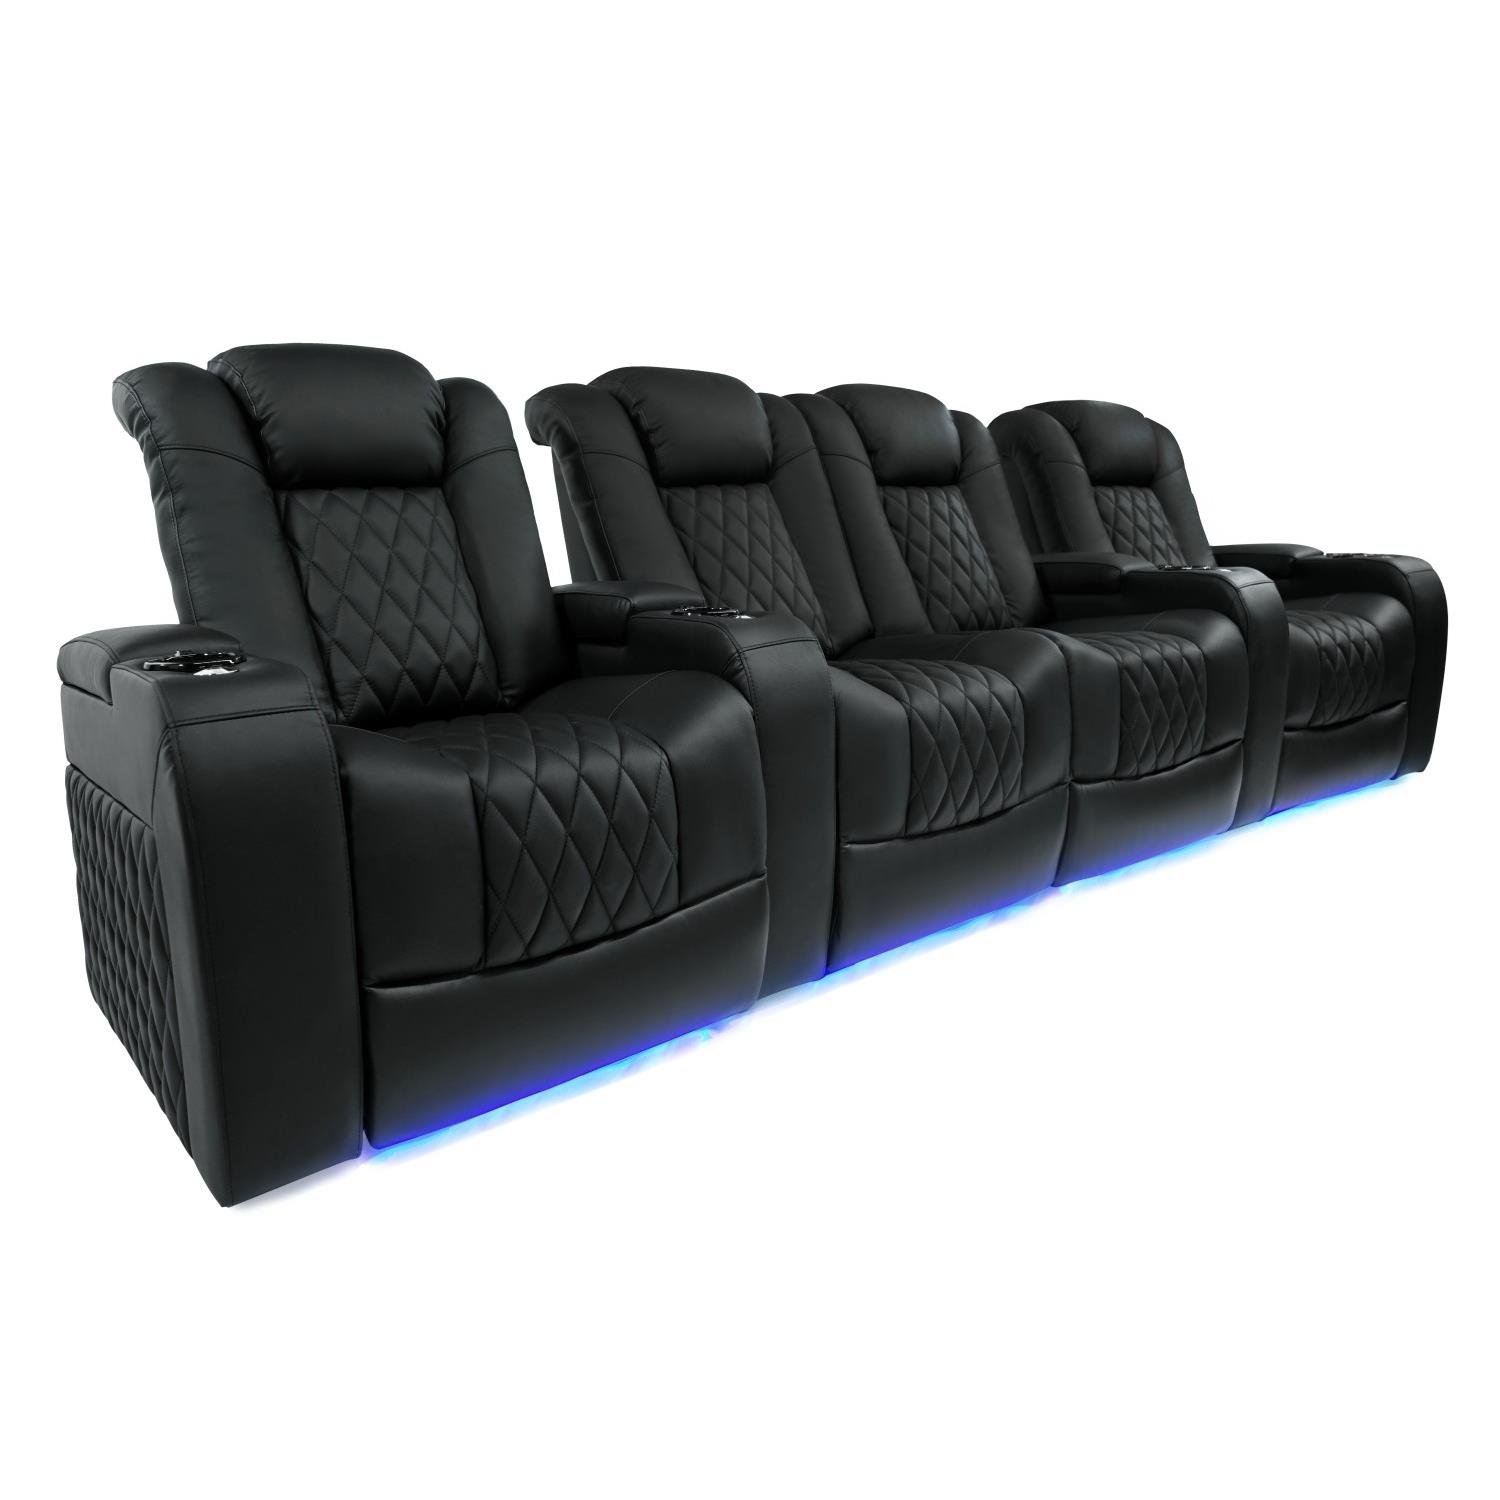 Valencia Tuscany Motorized Home Theater Seating - Top Grain Leather